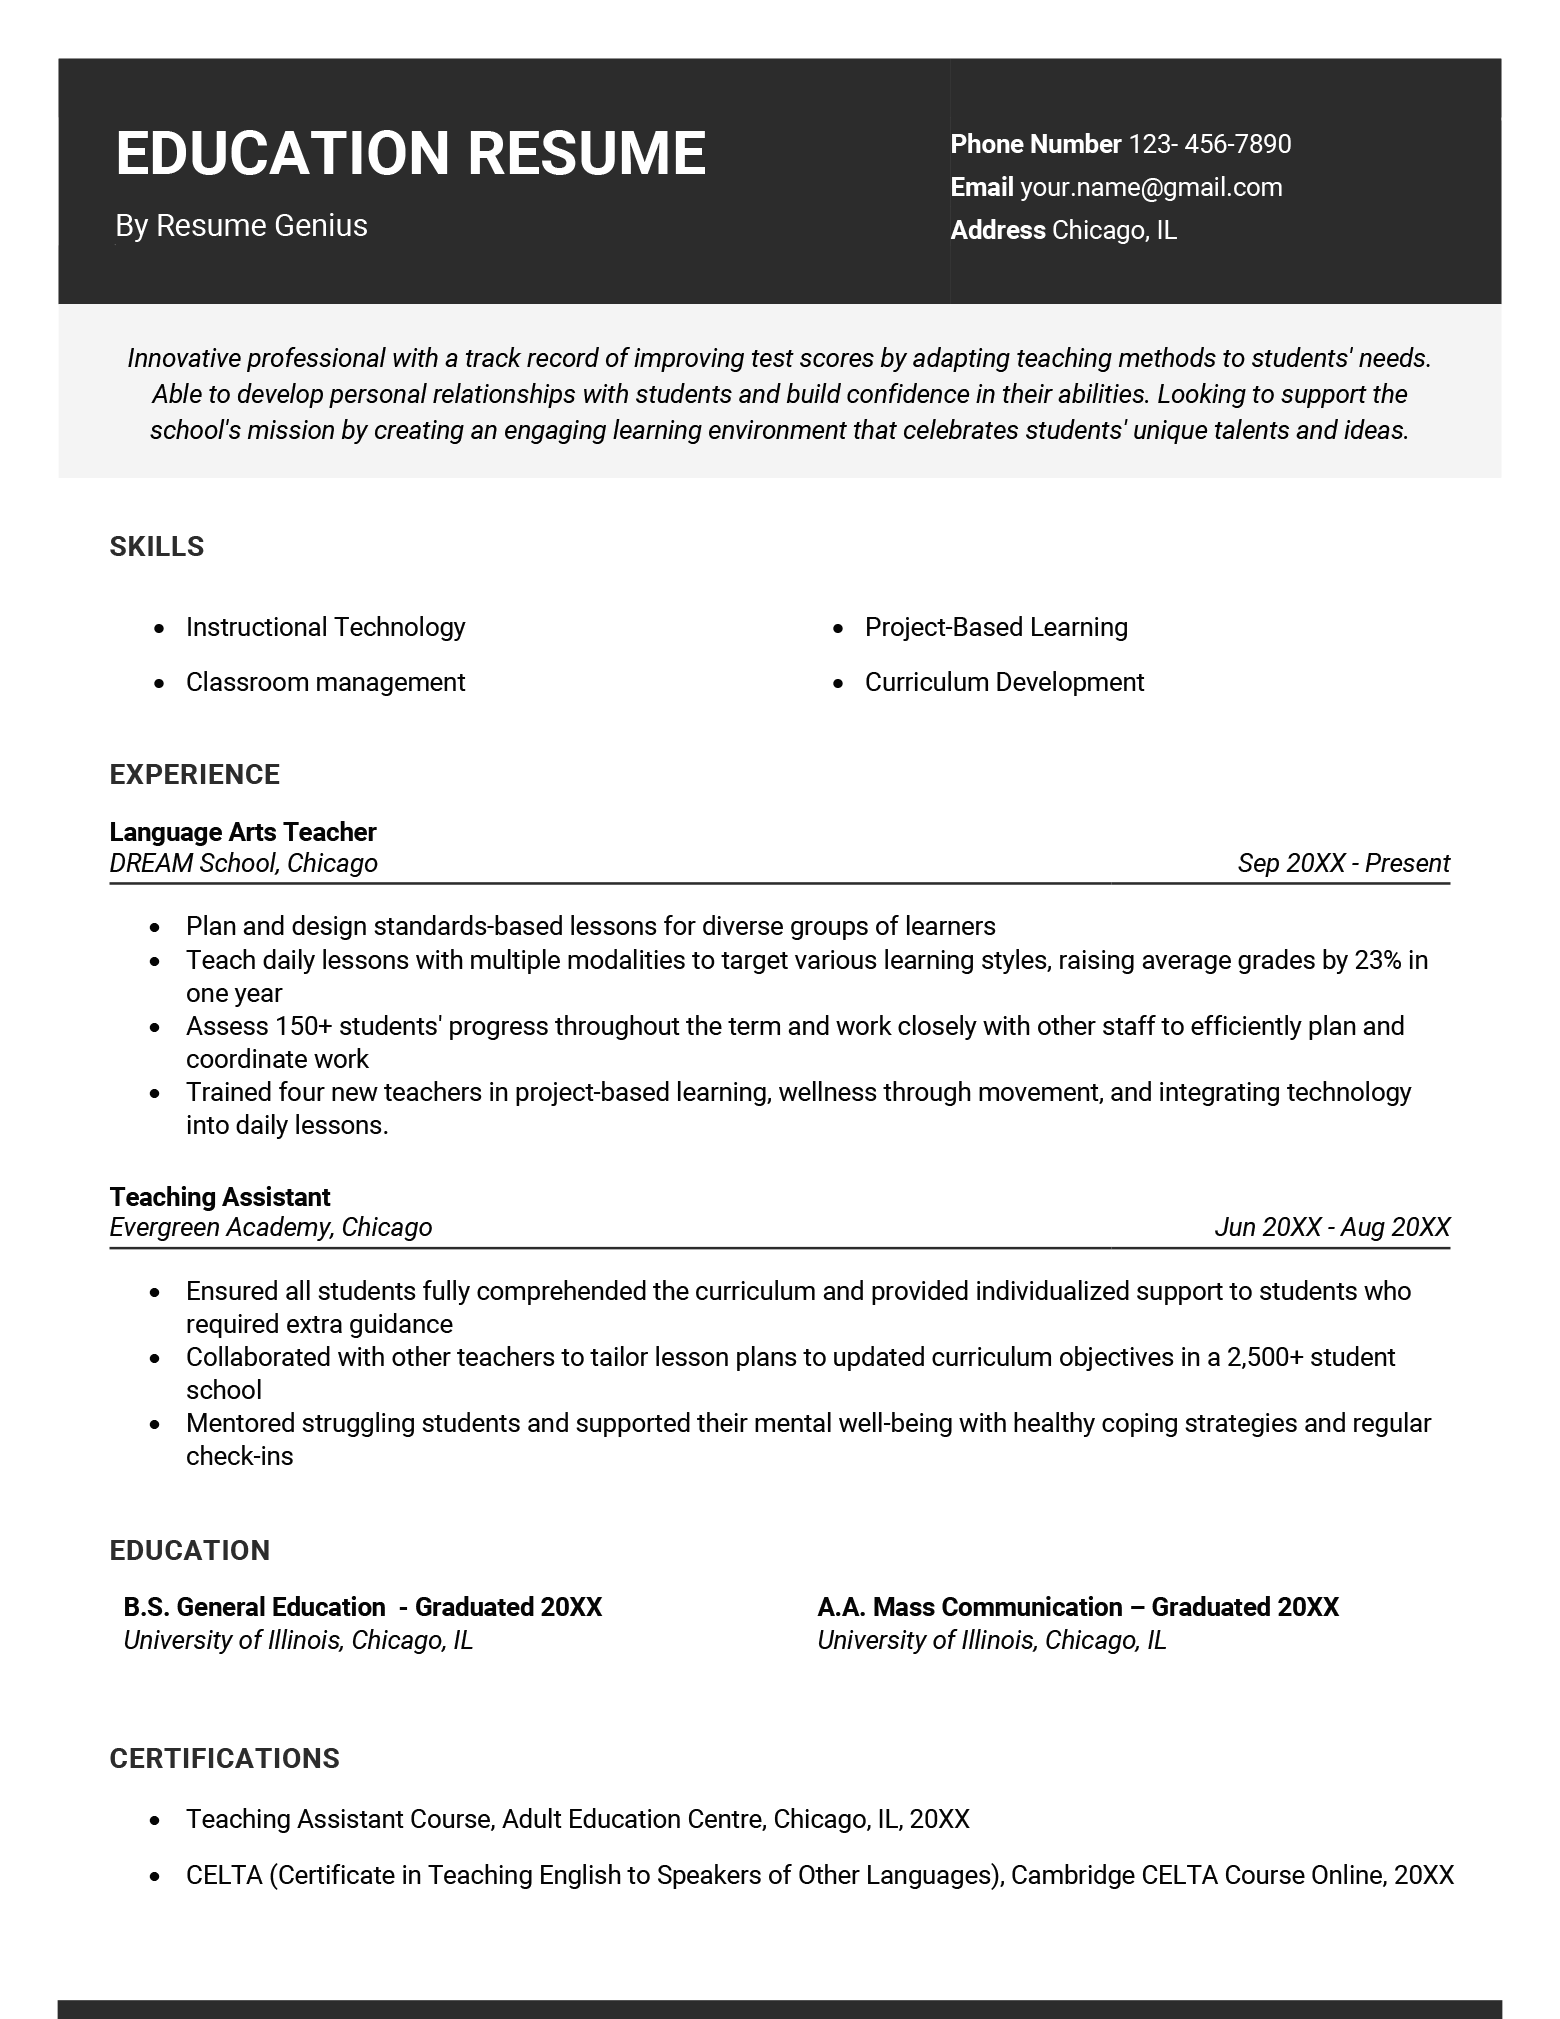 An example of a resume for an educational role